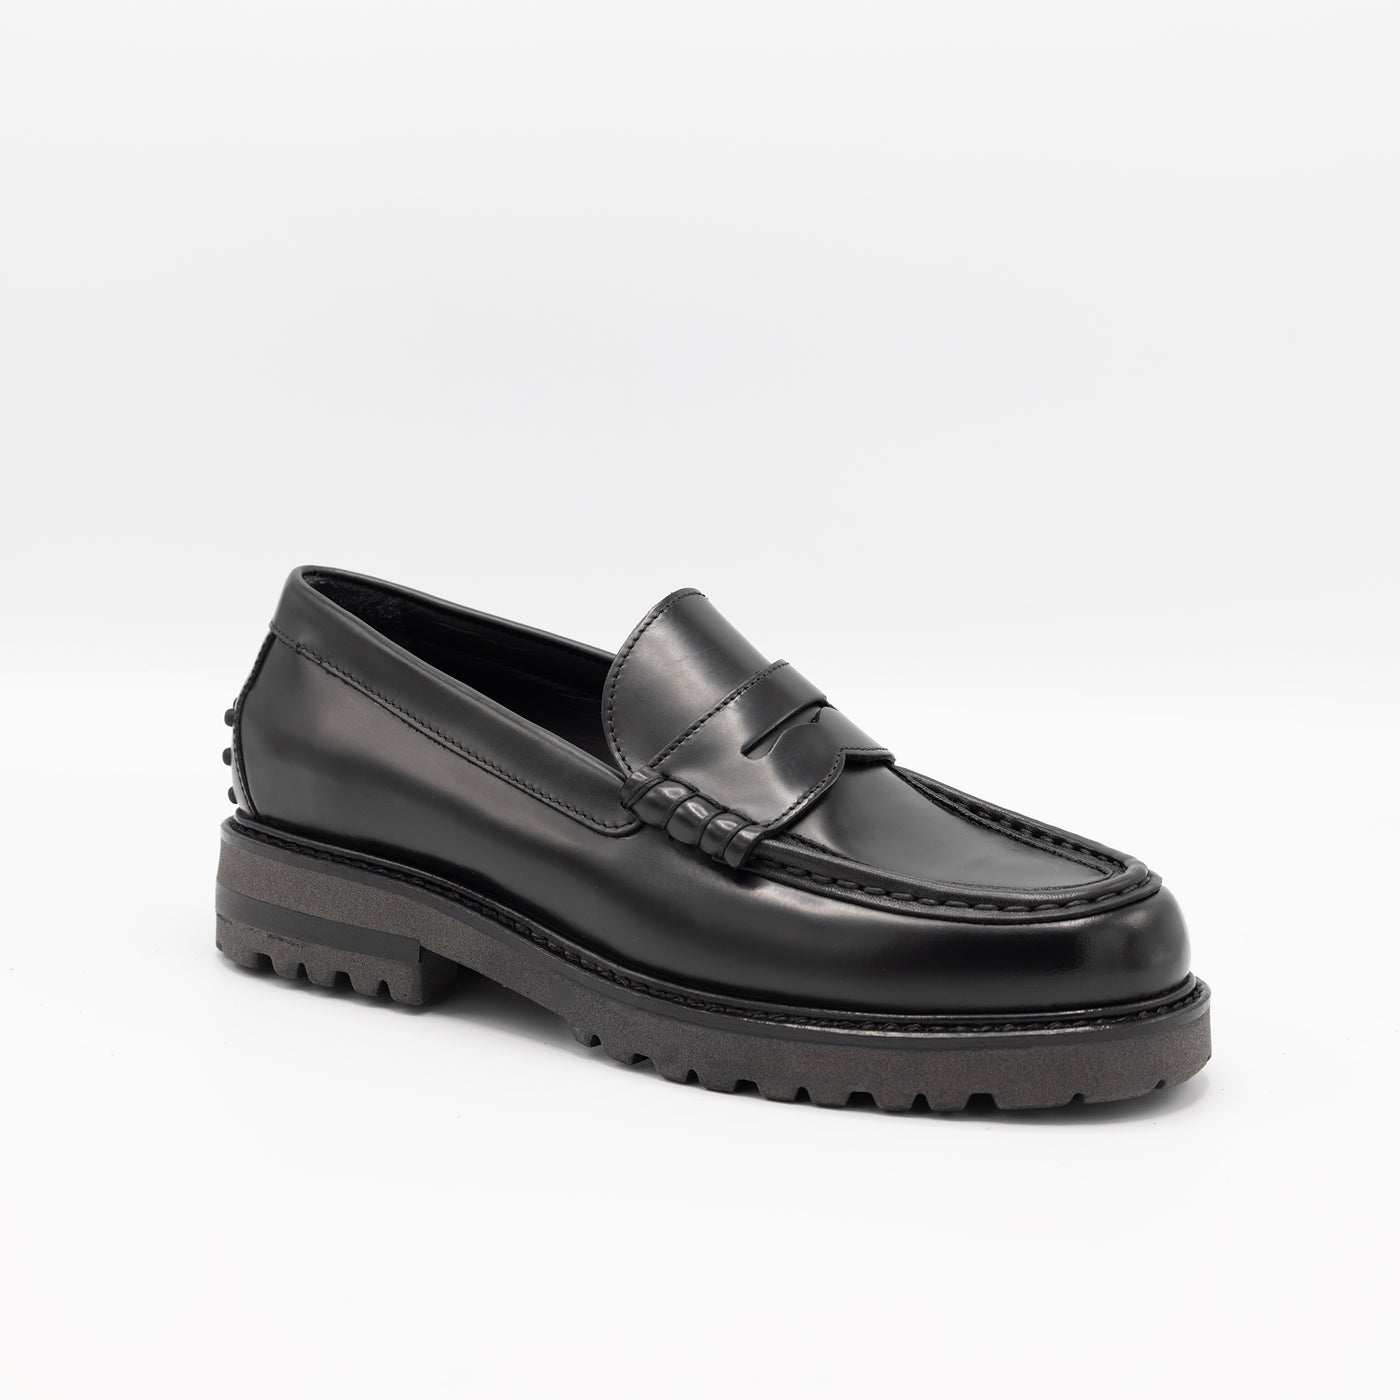 Black chunky leather loafers with sturdy rubber soles. Handmade in Italy